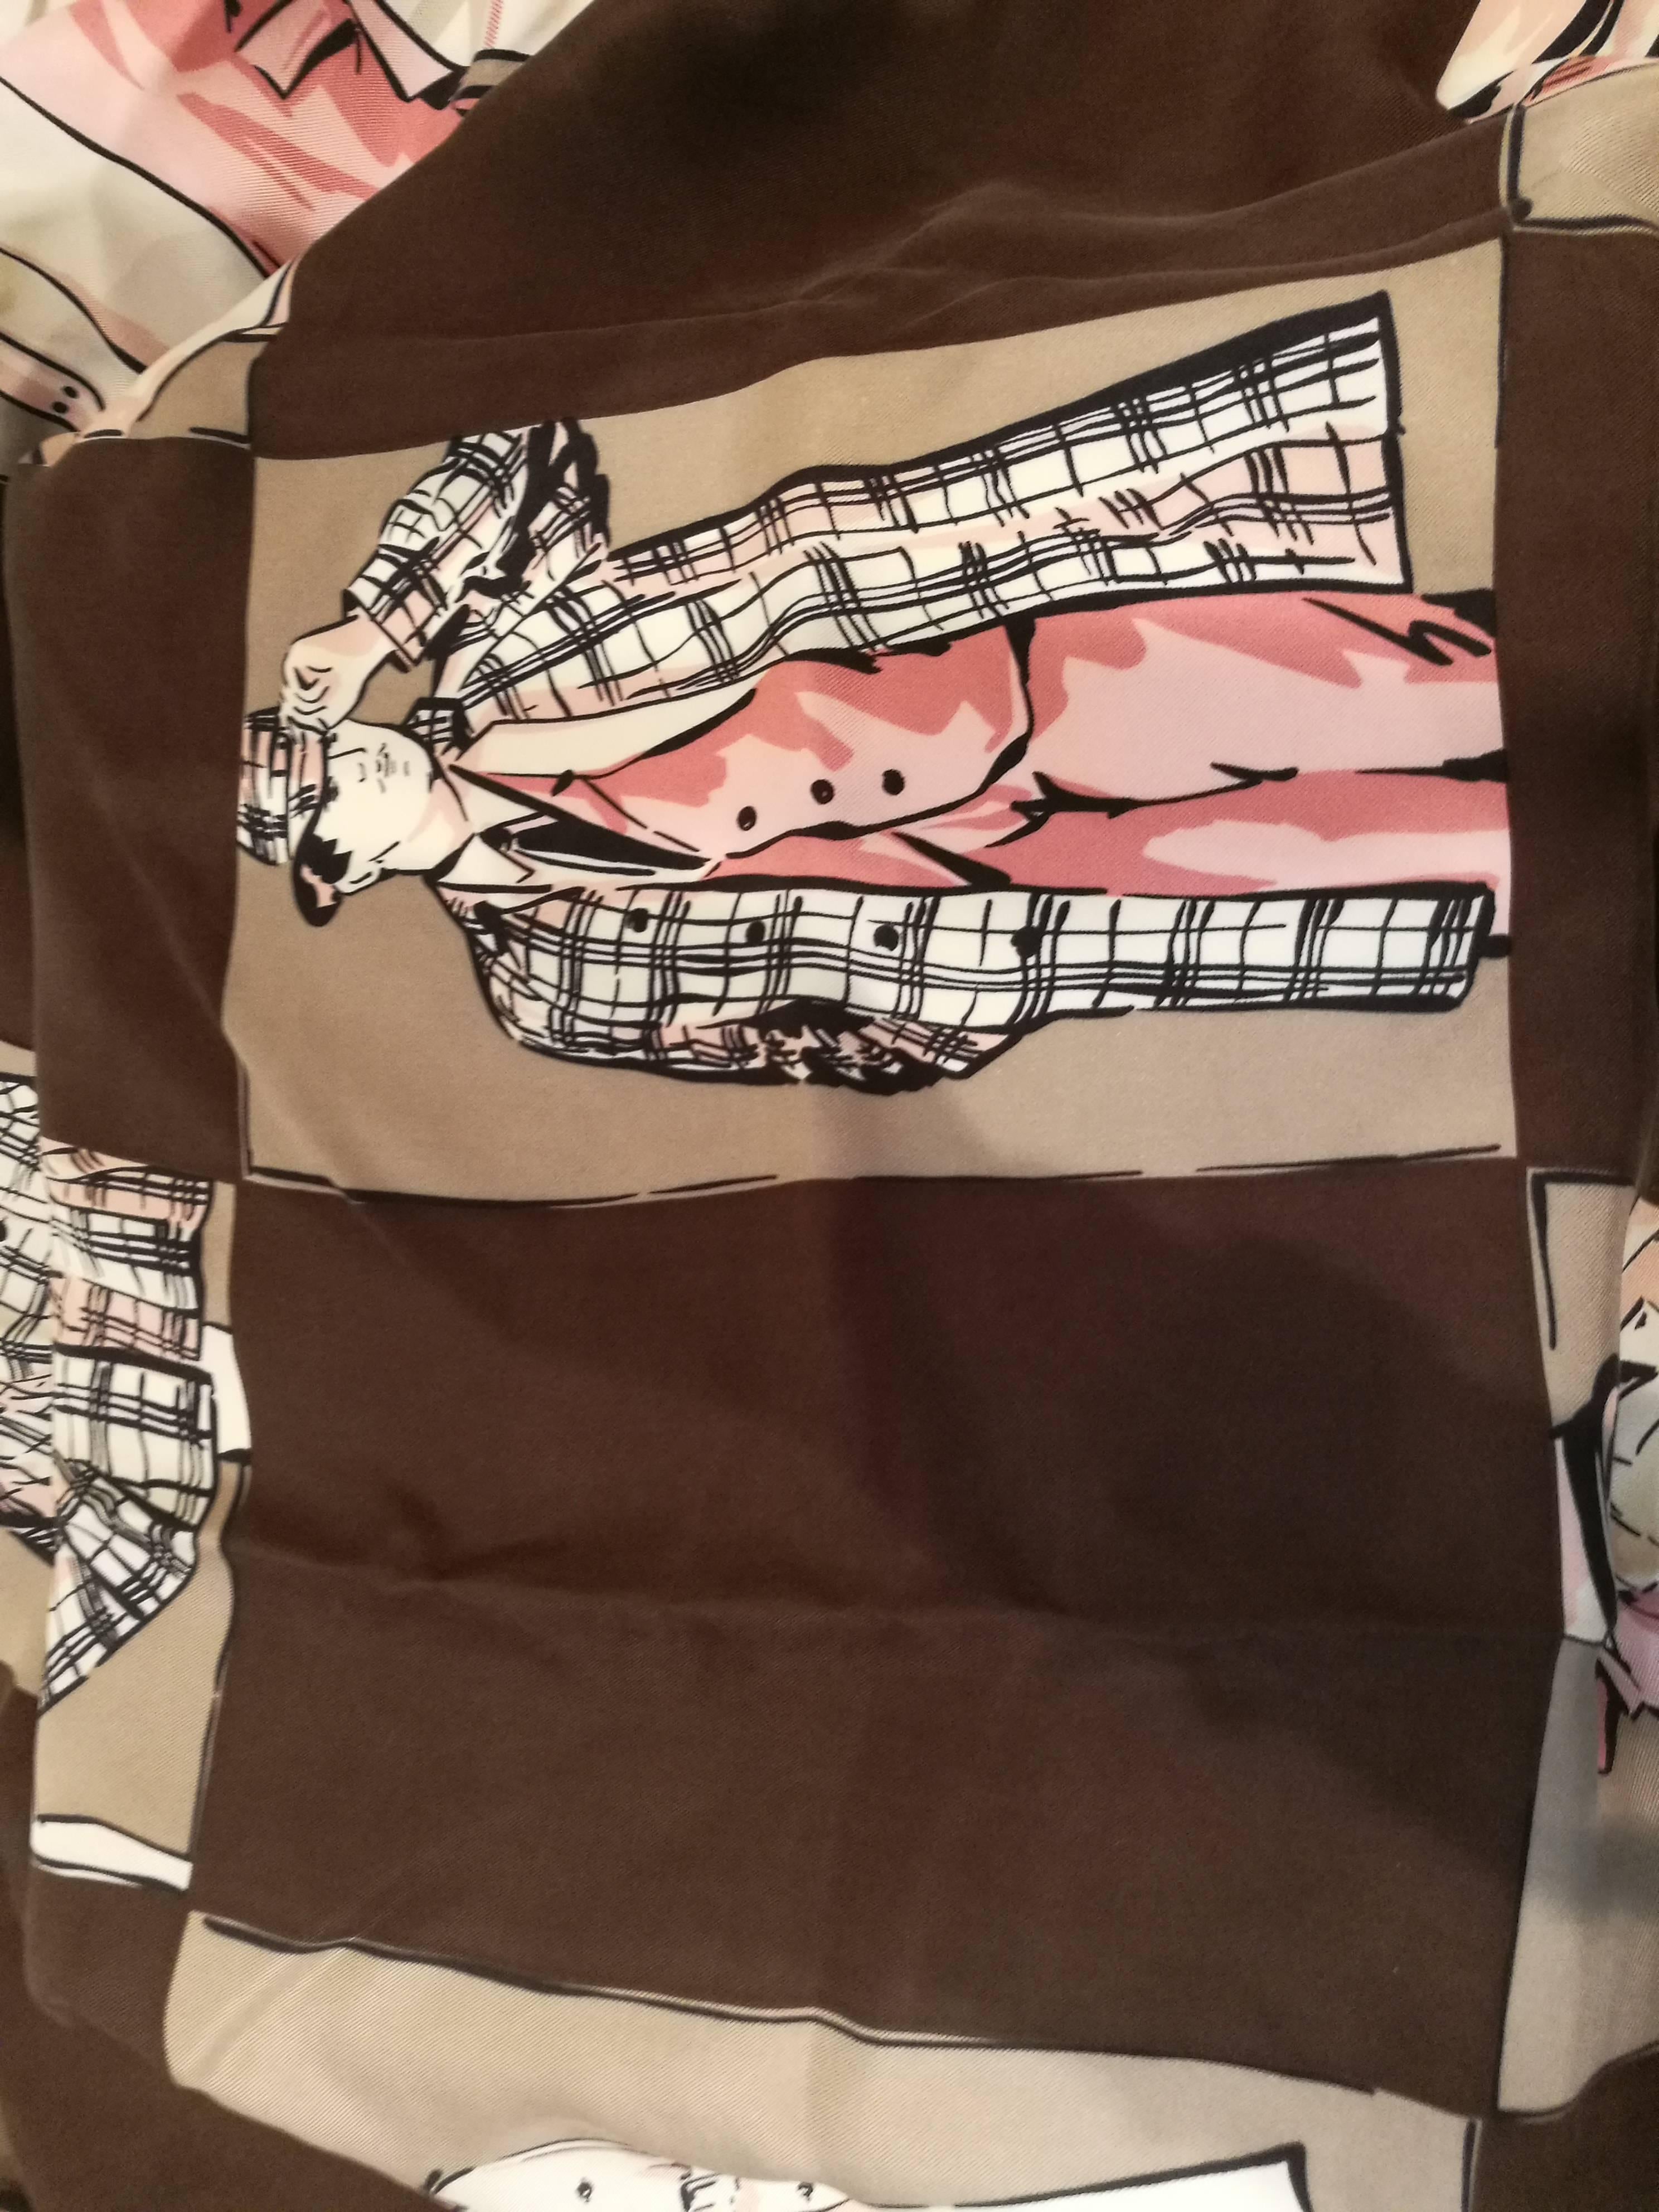 Burberry multitone silk scarf
Beije, brown and pink tone huge foulard totally made in italy in 100% silk
size: 85 cm x 85 cm